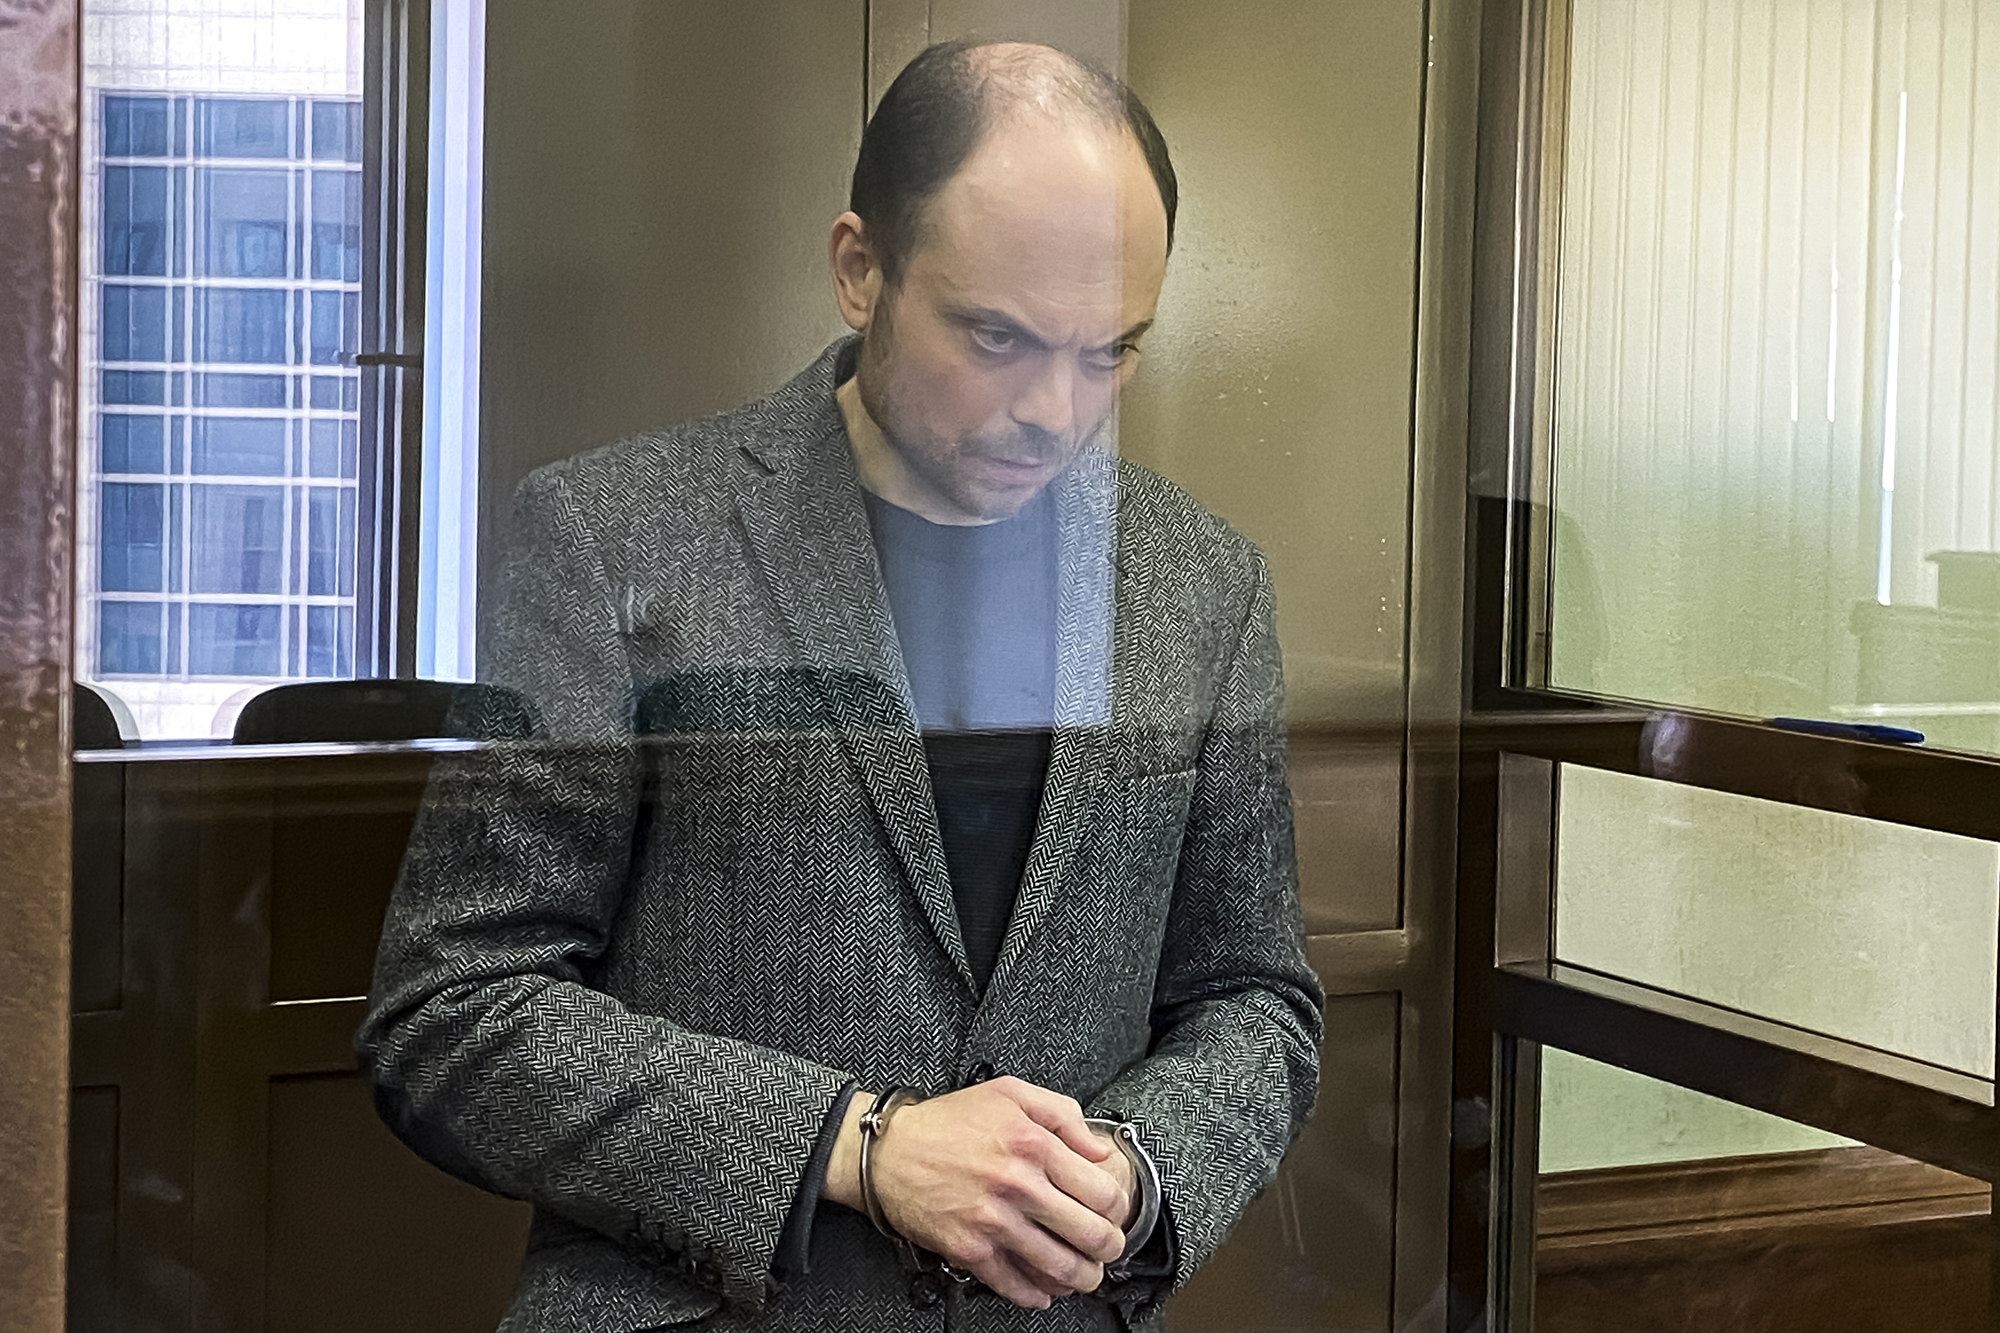 Russian opposition activist Vladimir Kara-Murza stands in a glass cage in a courtroom at the Moscow City Court in Moscow, Russia, on April 17.